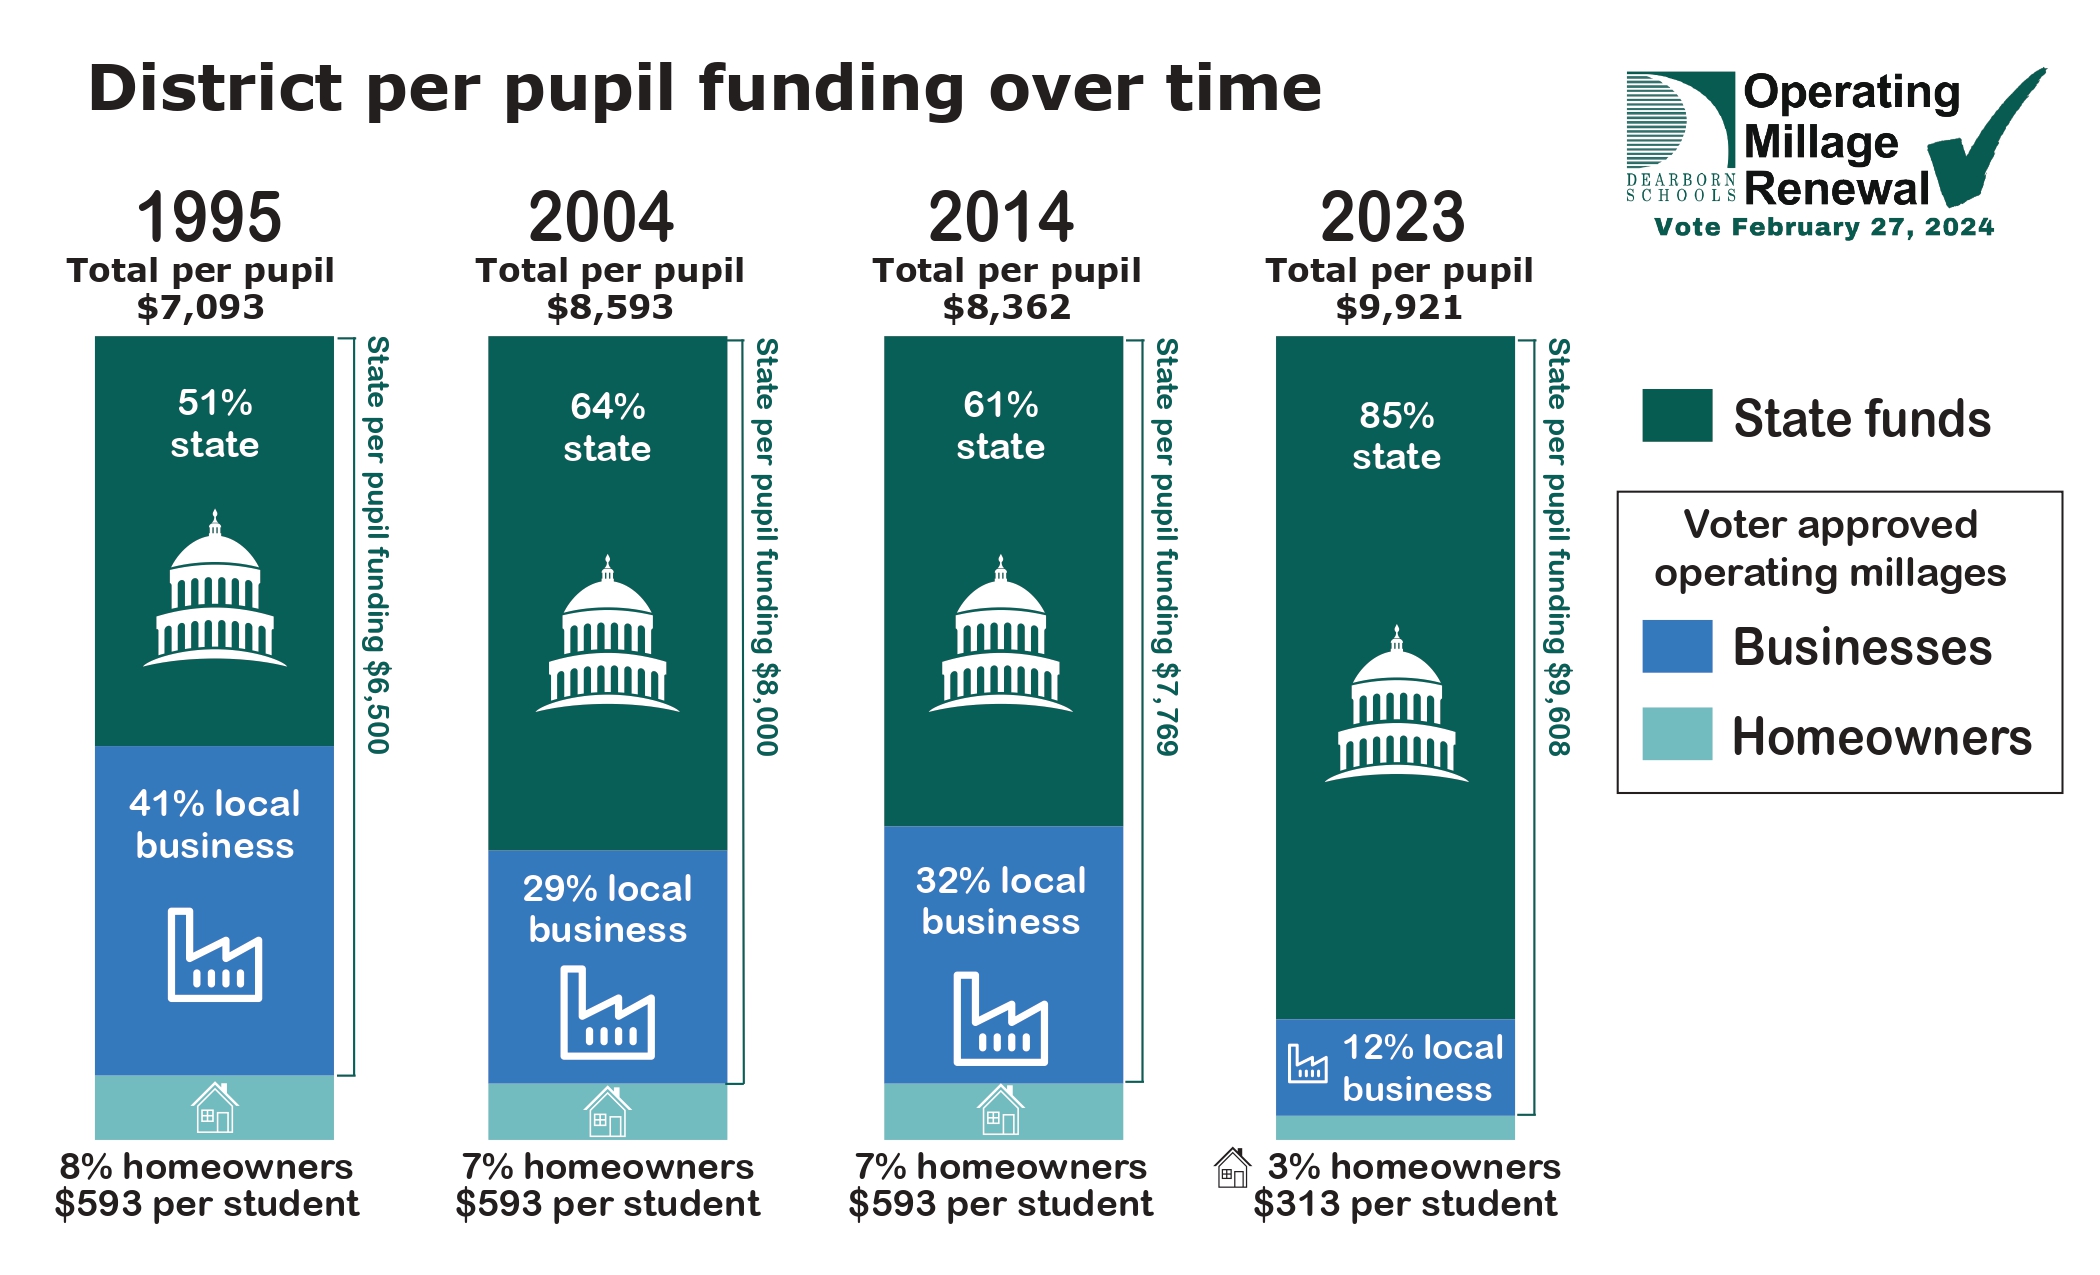 Bar chart showing break down of per pupil funding over time.